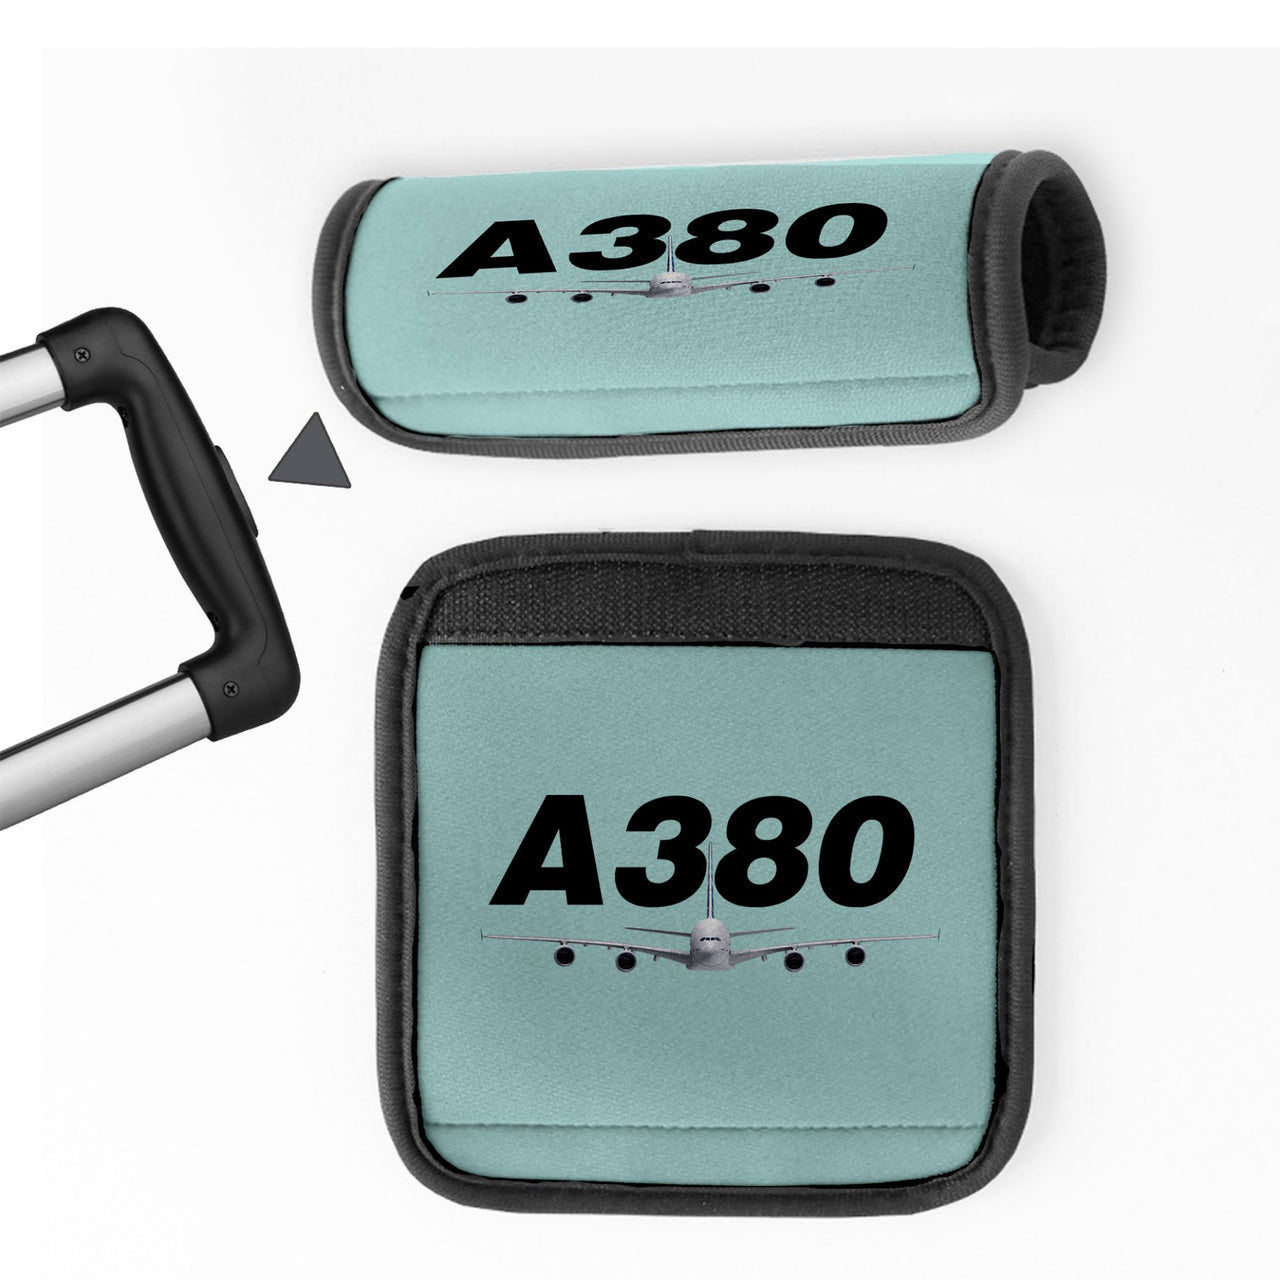 Super Airbus A380 Designed Neoprene Luggage Handle Covers